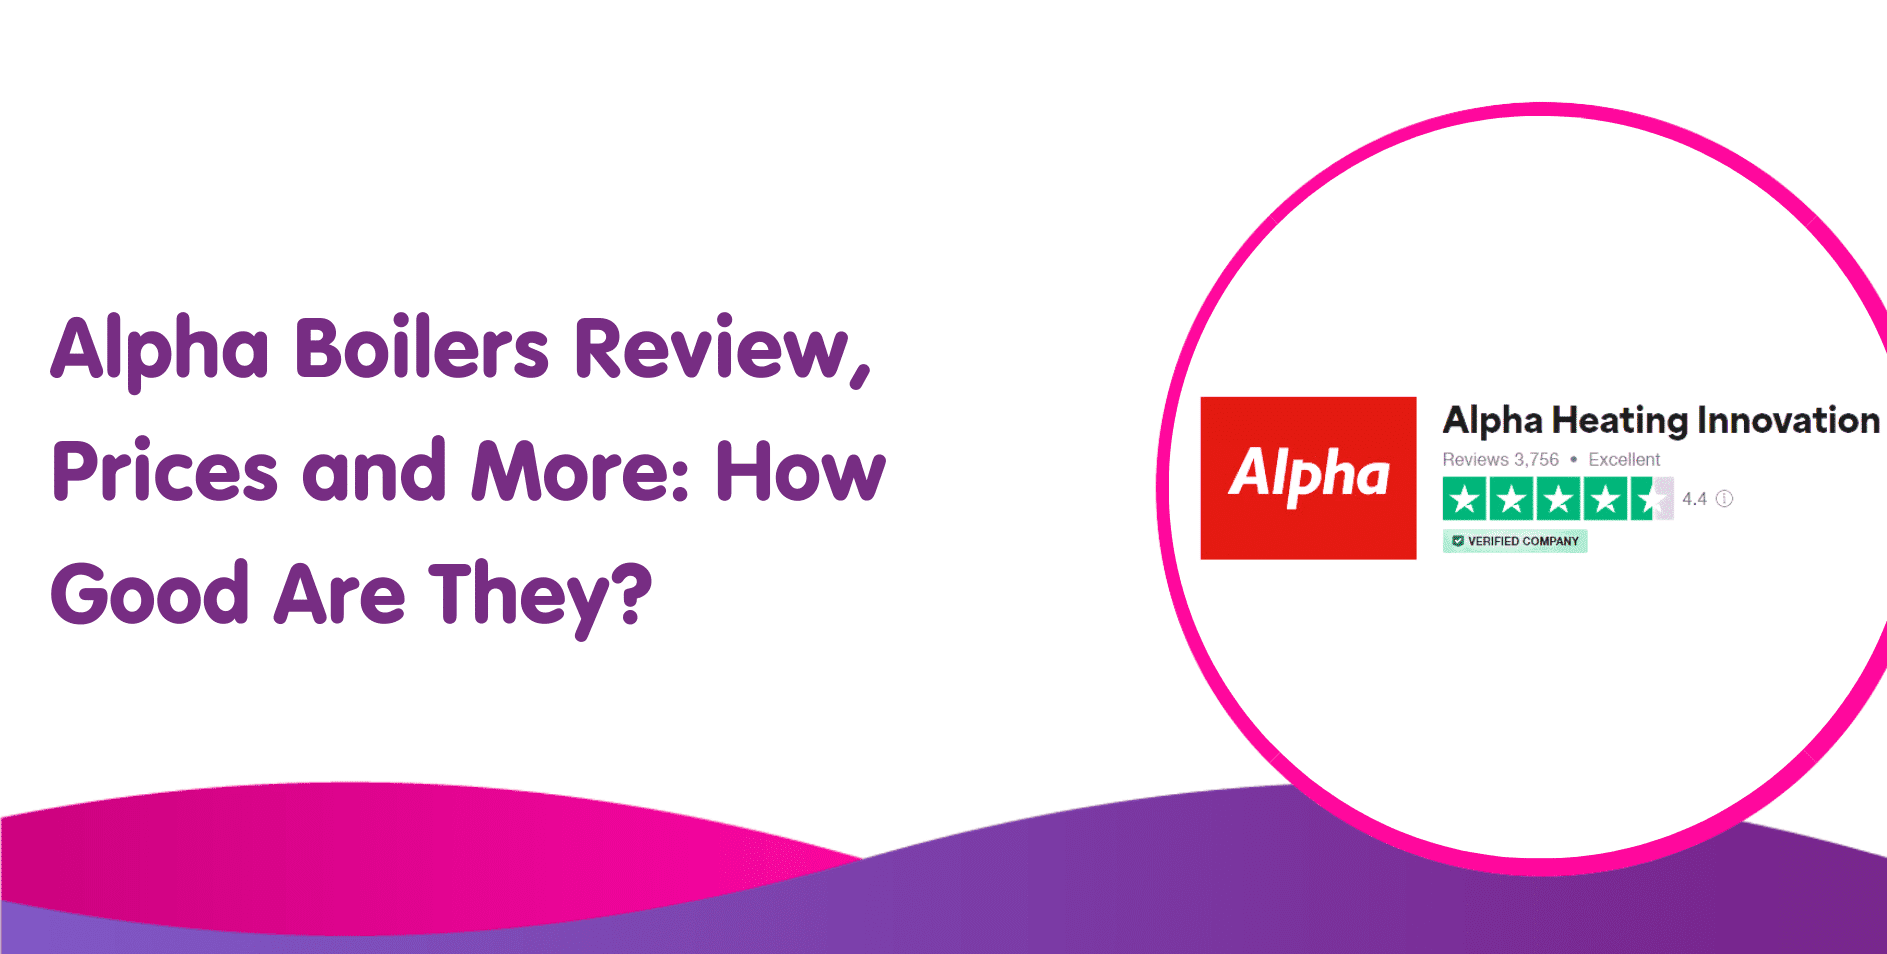 Alpha Boilers Review, Prices and More: How Good Are They